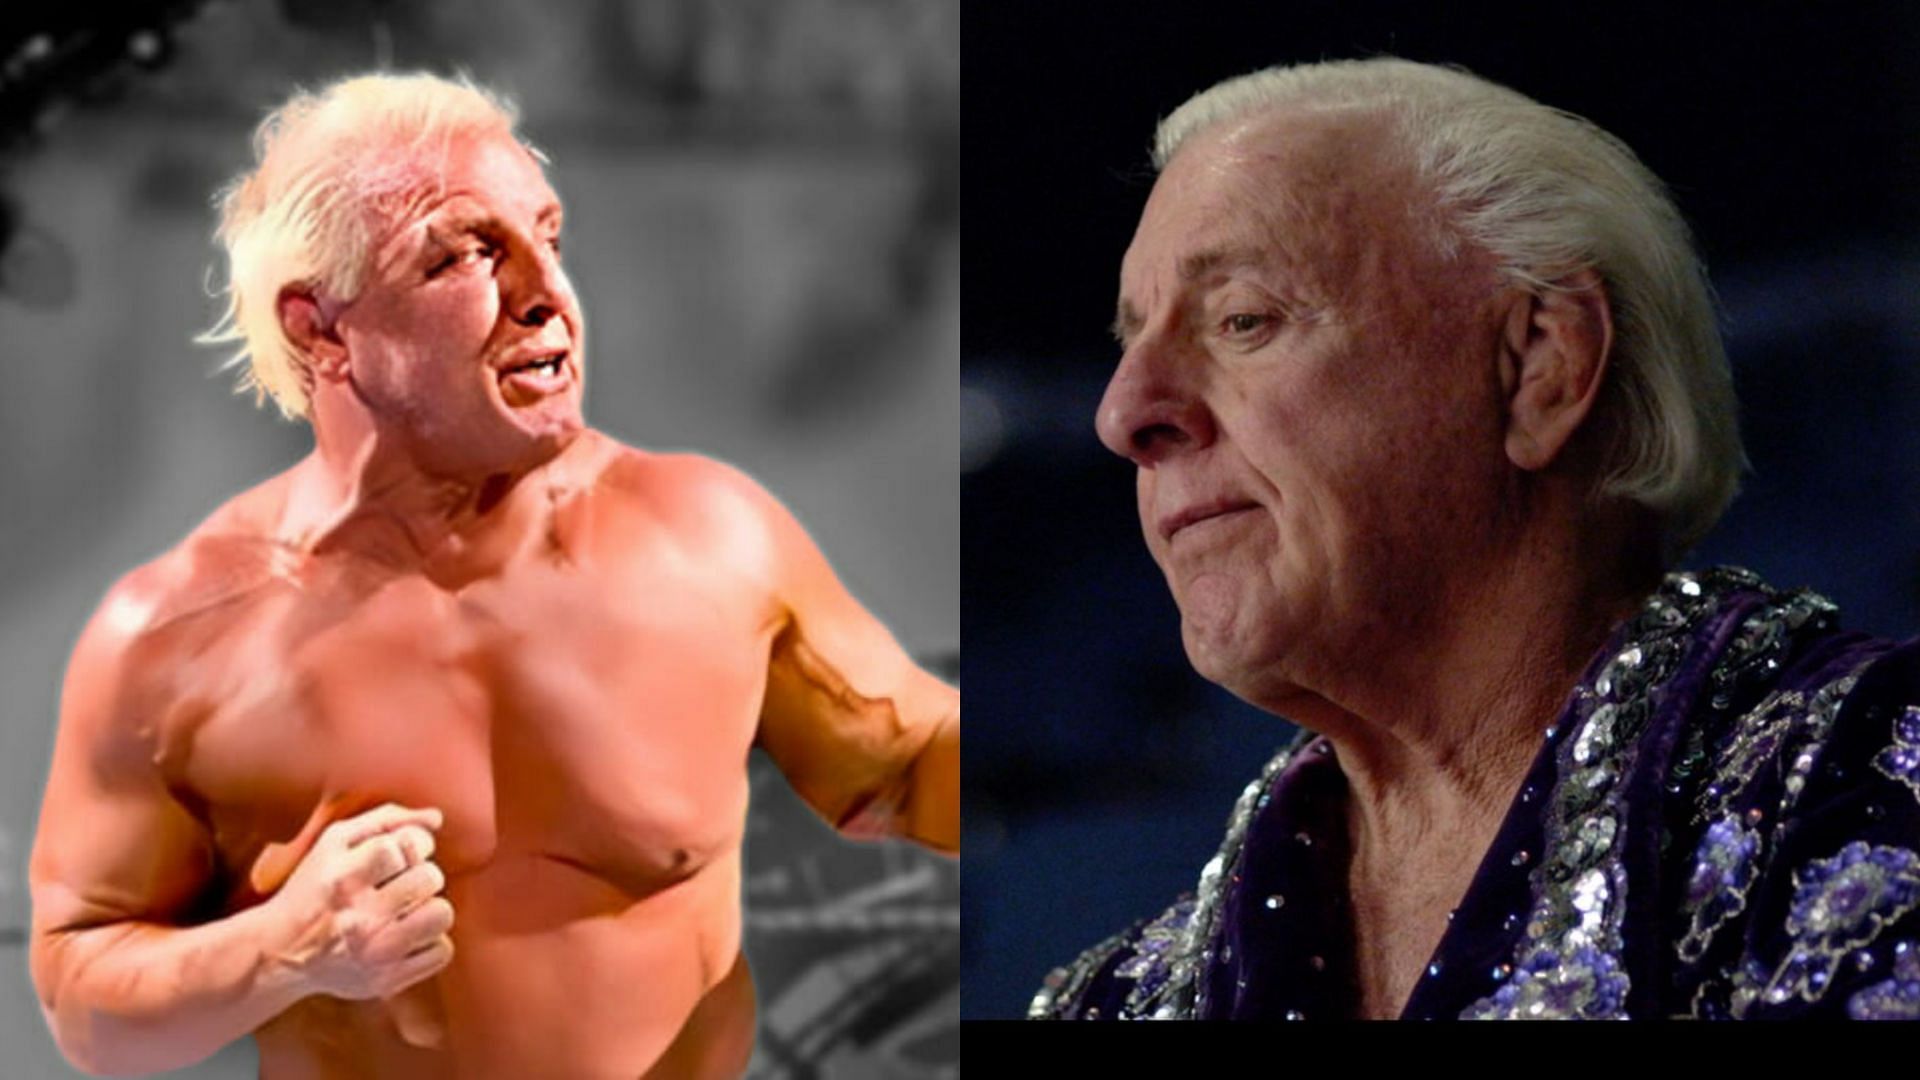 WWE Hall of Famer Ric Flair tried to pick a fight with Eric Bischoff